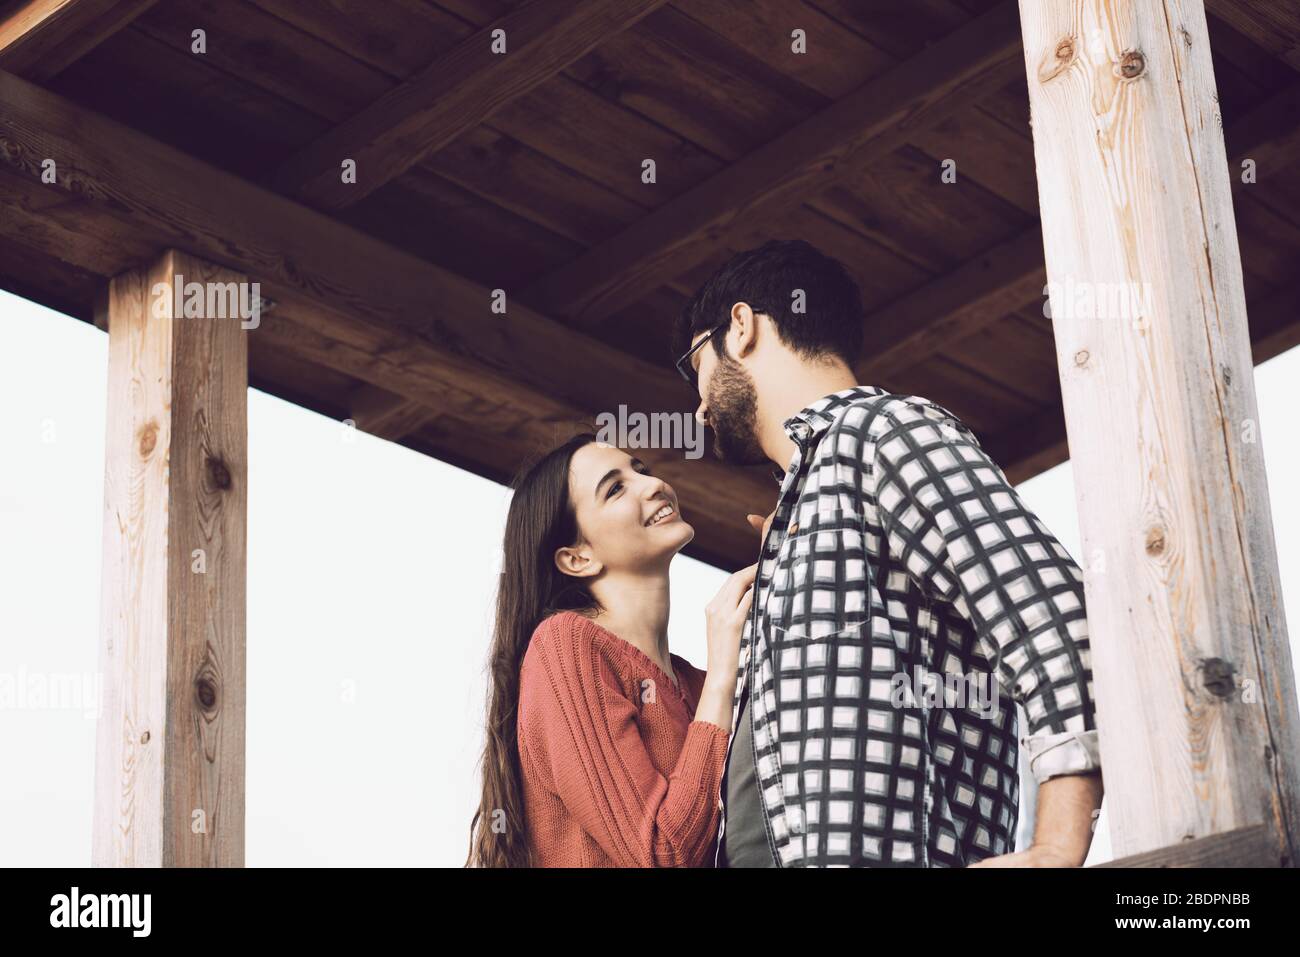 Romantic loving couple staring at each other in a wooden gazebo, feelings and relationships concept Stock Photo